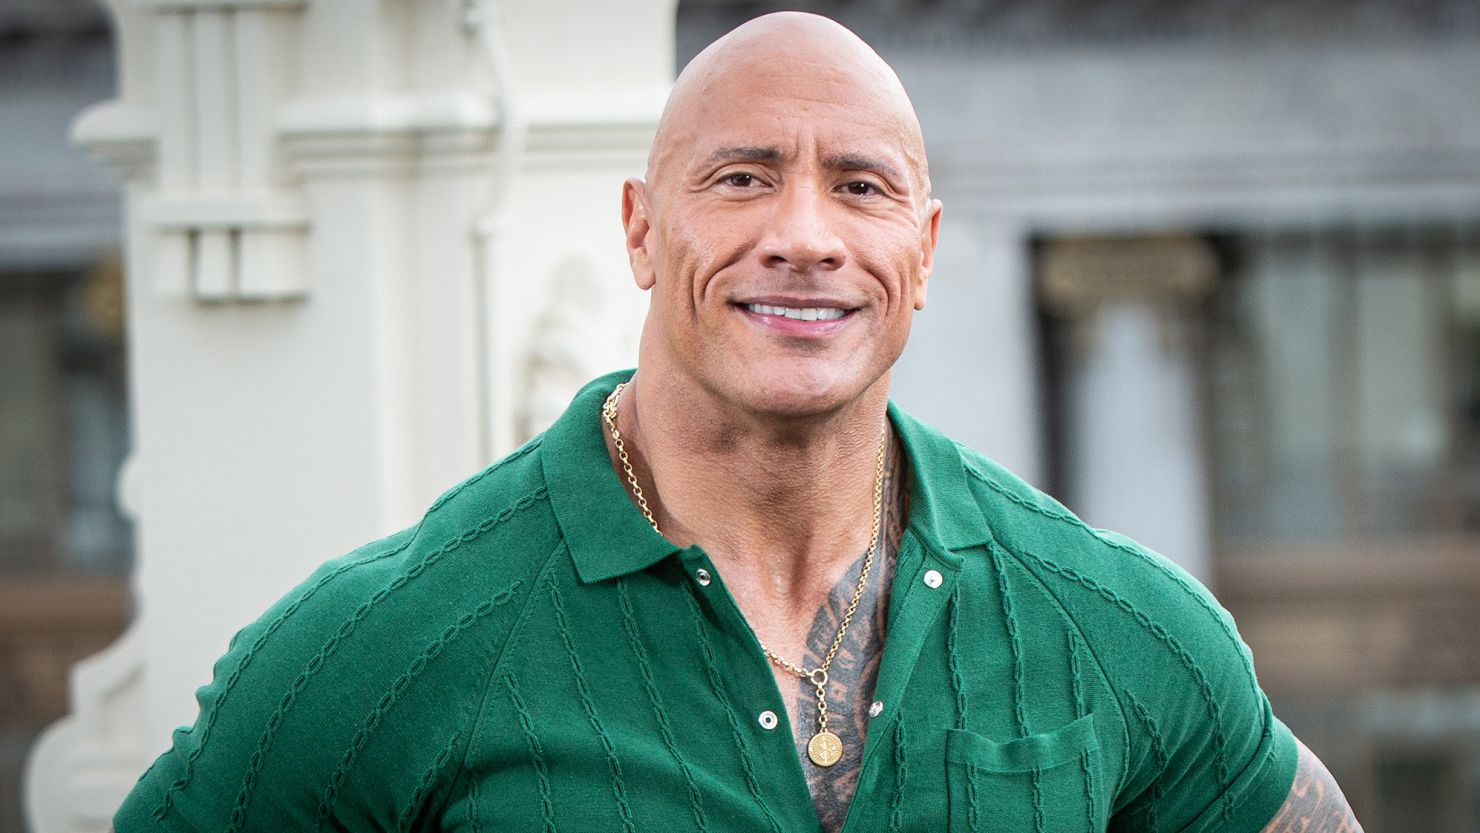 Dwayne 'The Rock' Johnson scores mega payday to join the WWE's board | CNN Business